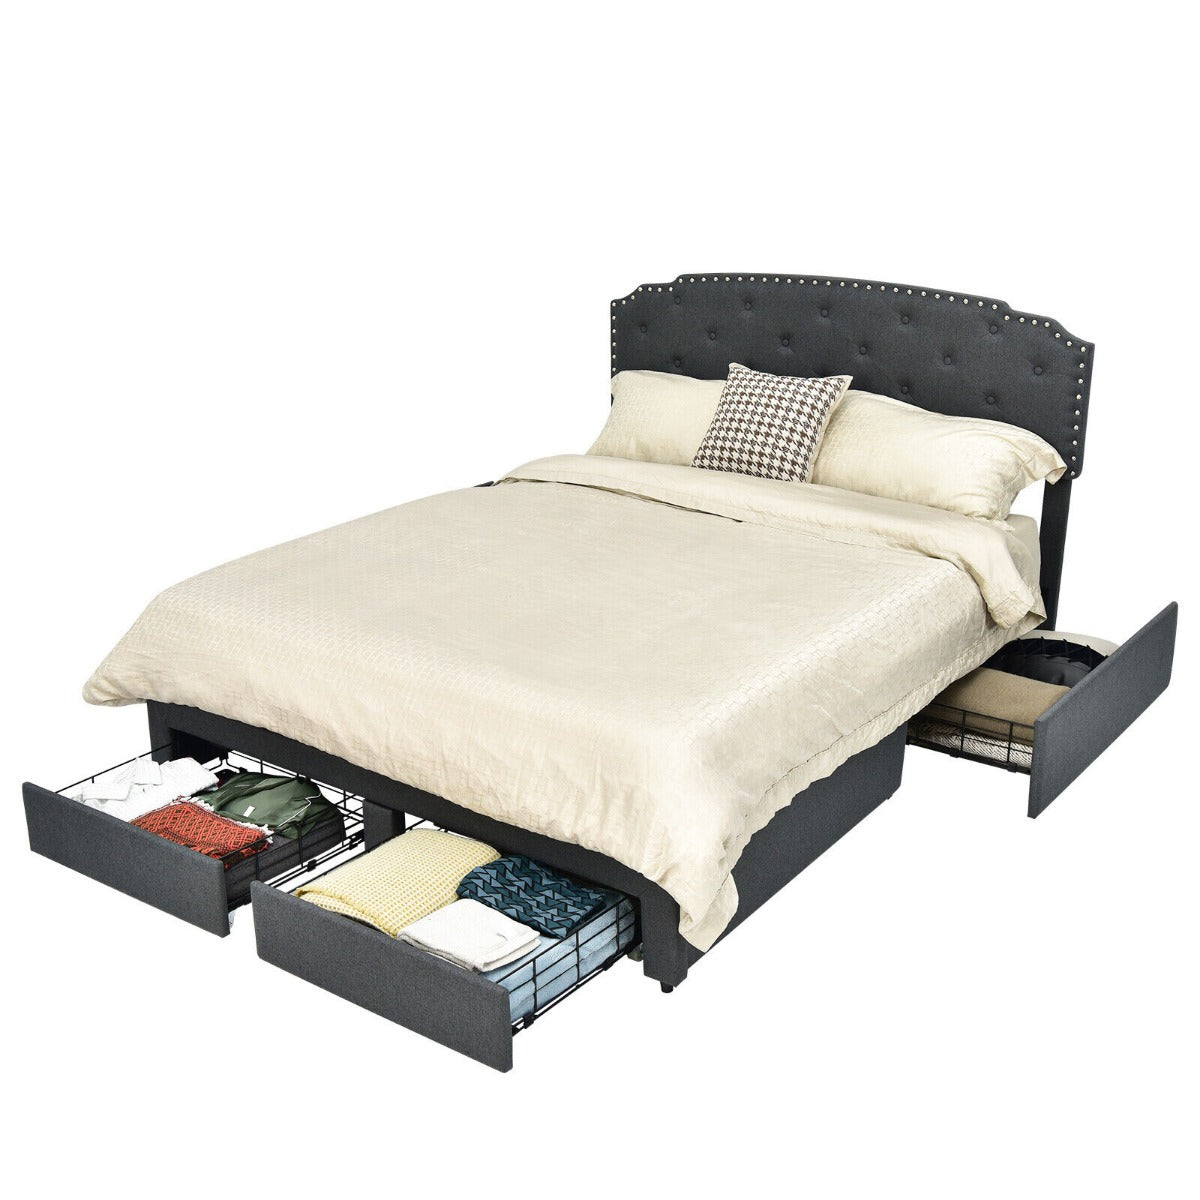 Upholstered Double Bed Frame with 4 Storage Drawers and Adjustable Headboard-197 x 150 cm